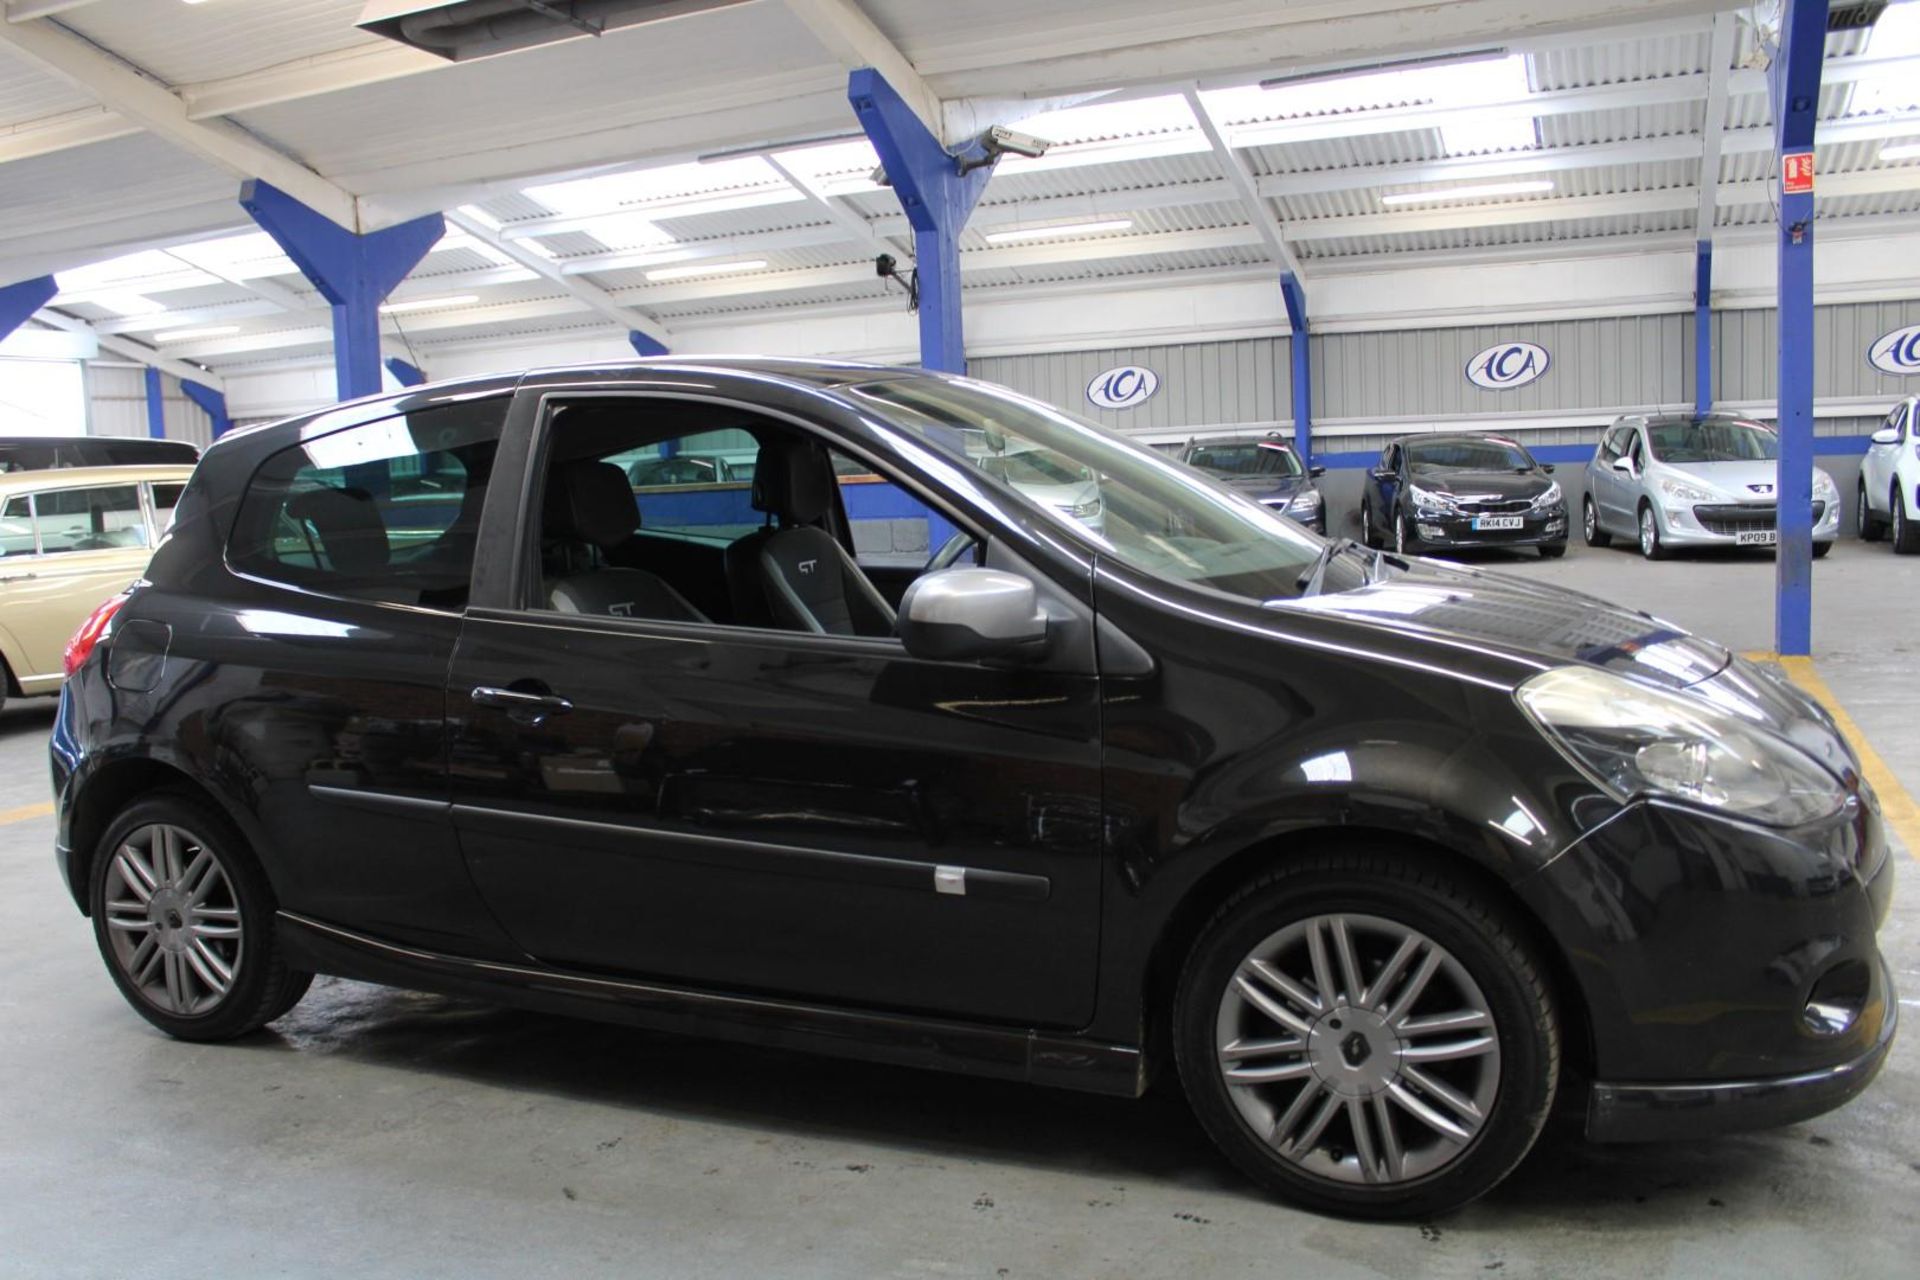 59 09 Renault Clio GT - Image 21 of 31